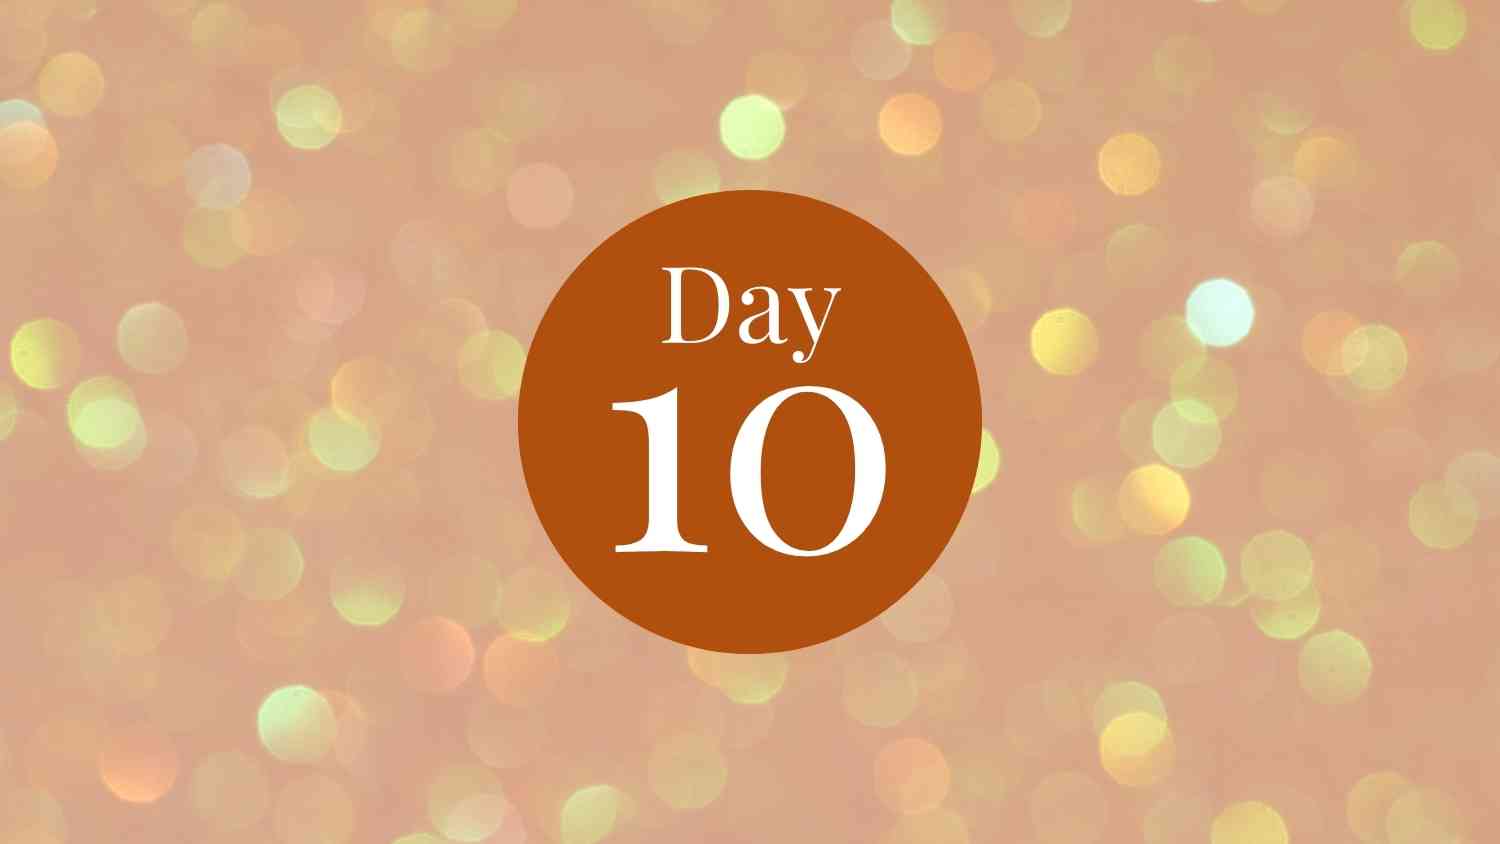 12 days of fitness day 10